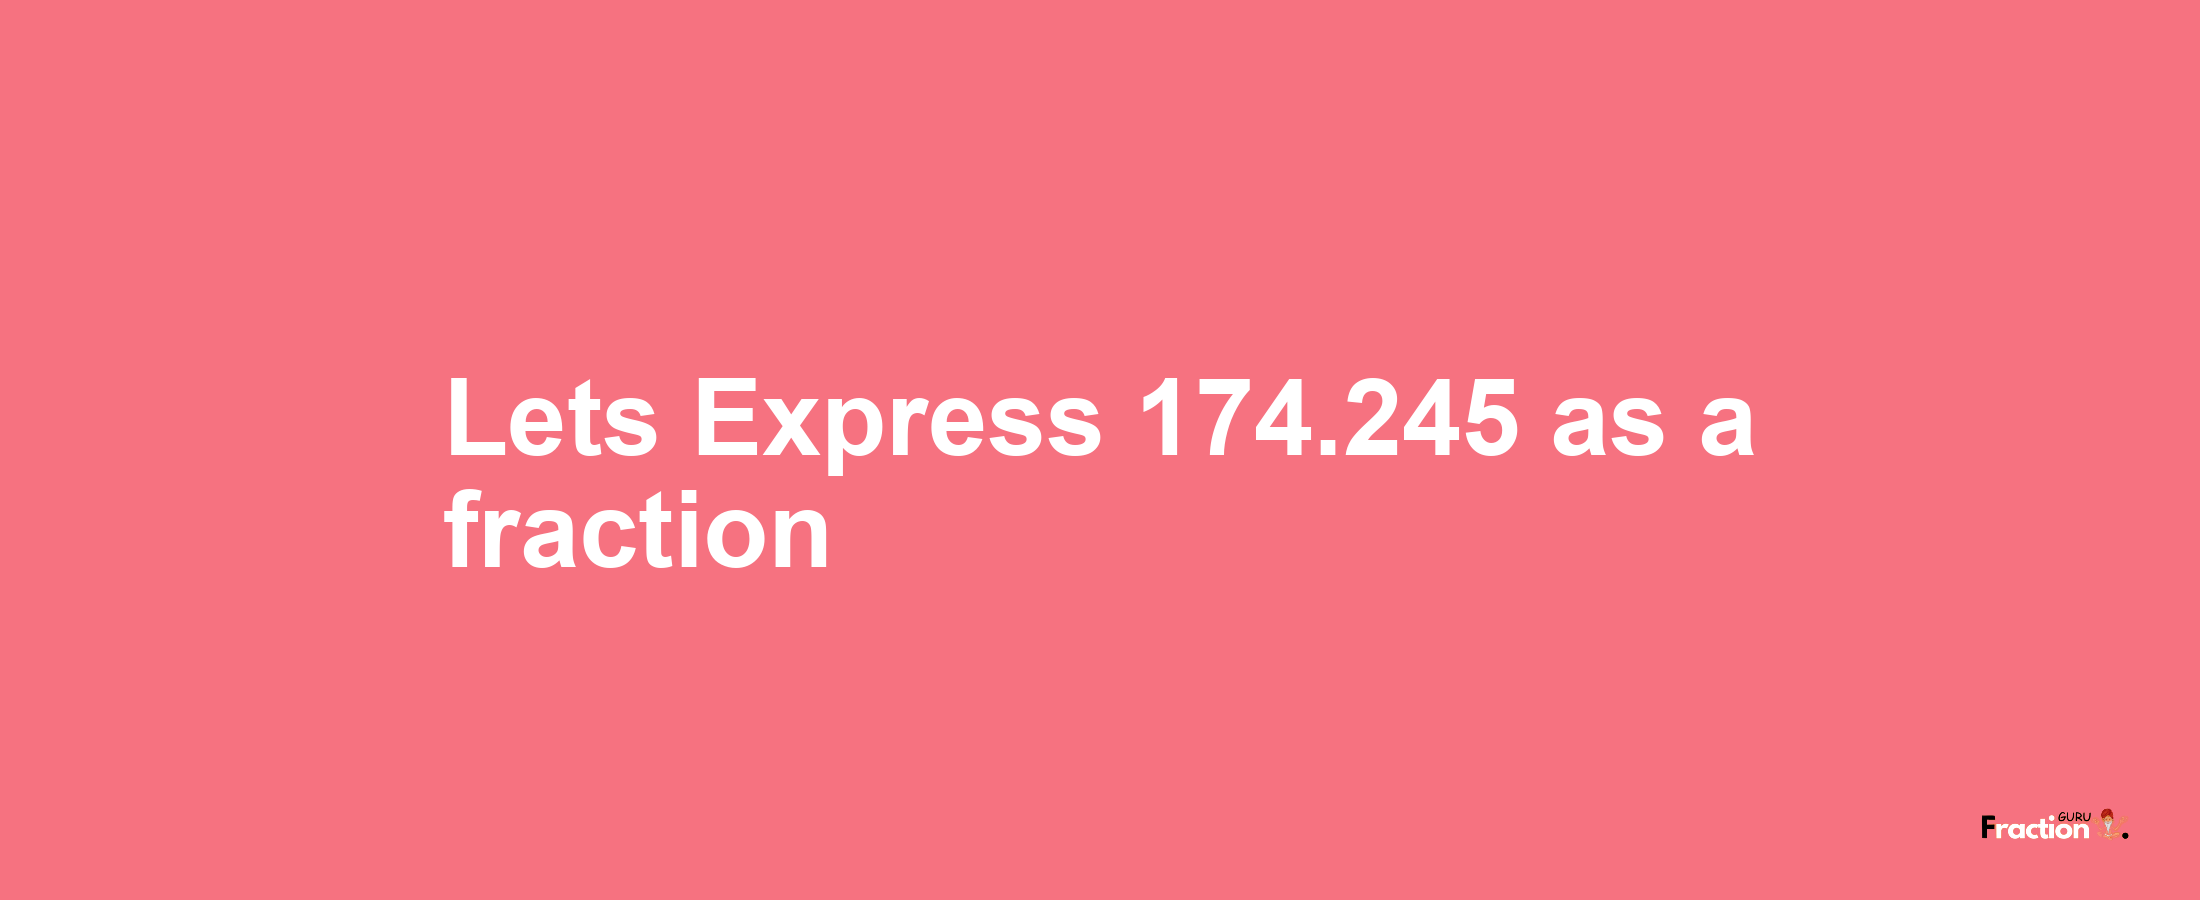 Lets Express 174.245 as afraction